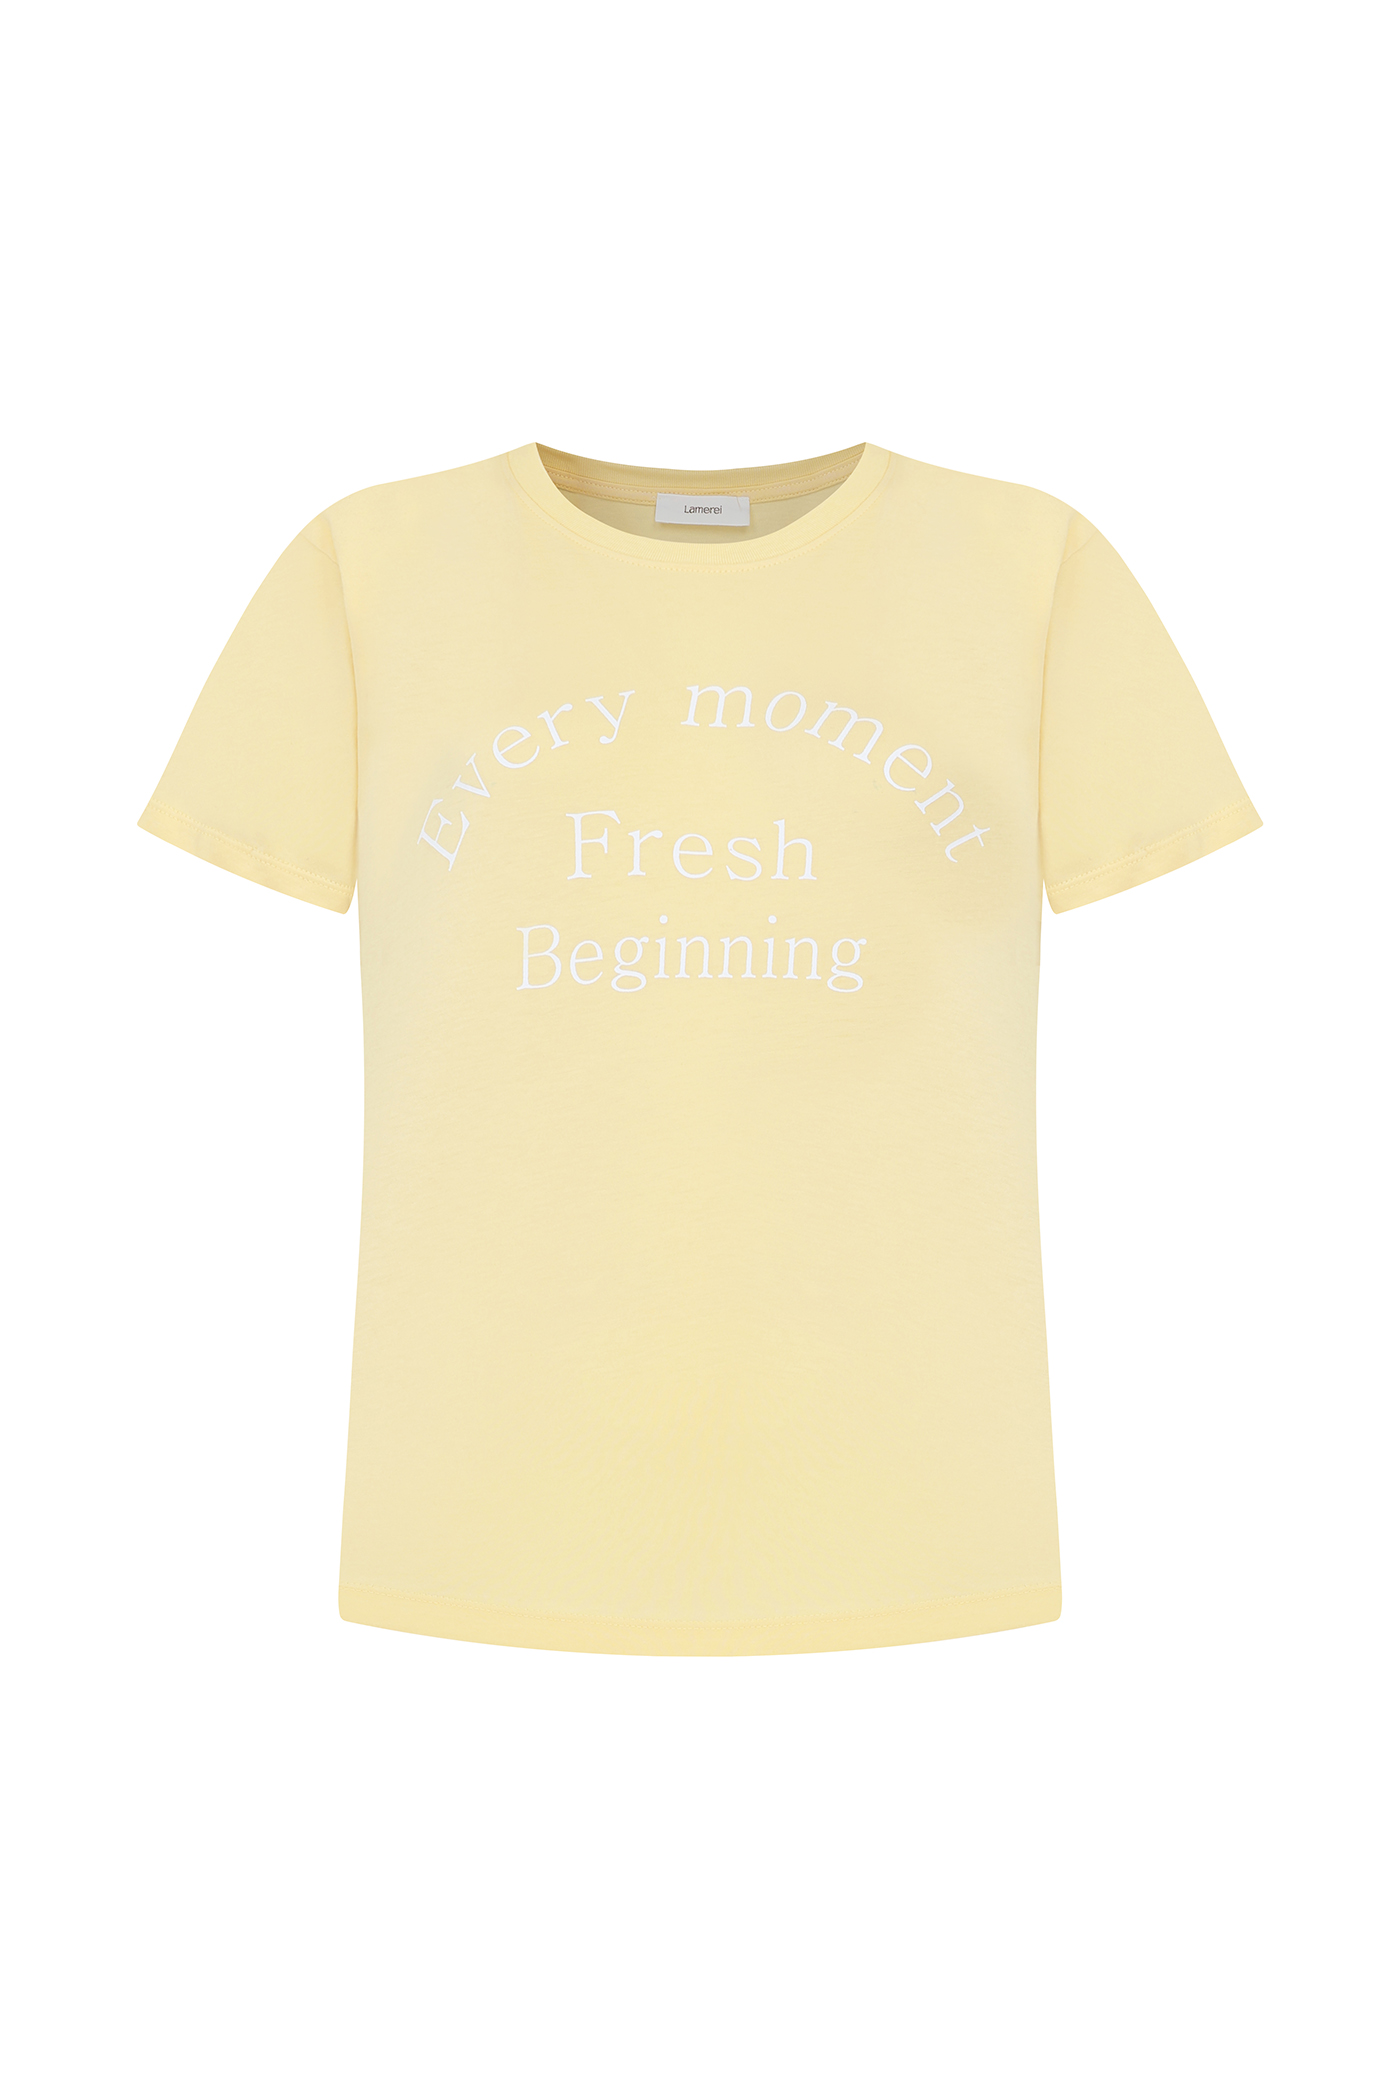 Everymoment Printing T-shirts[LMBCSUTT612]-3color